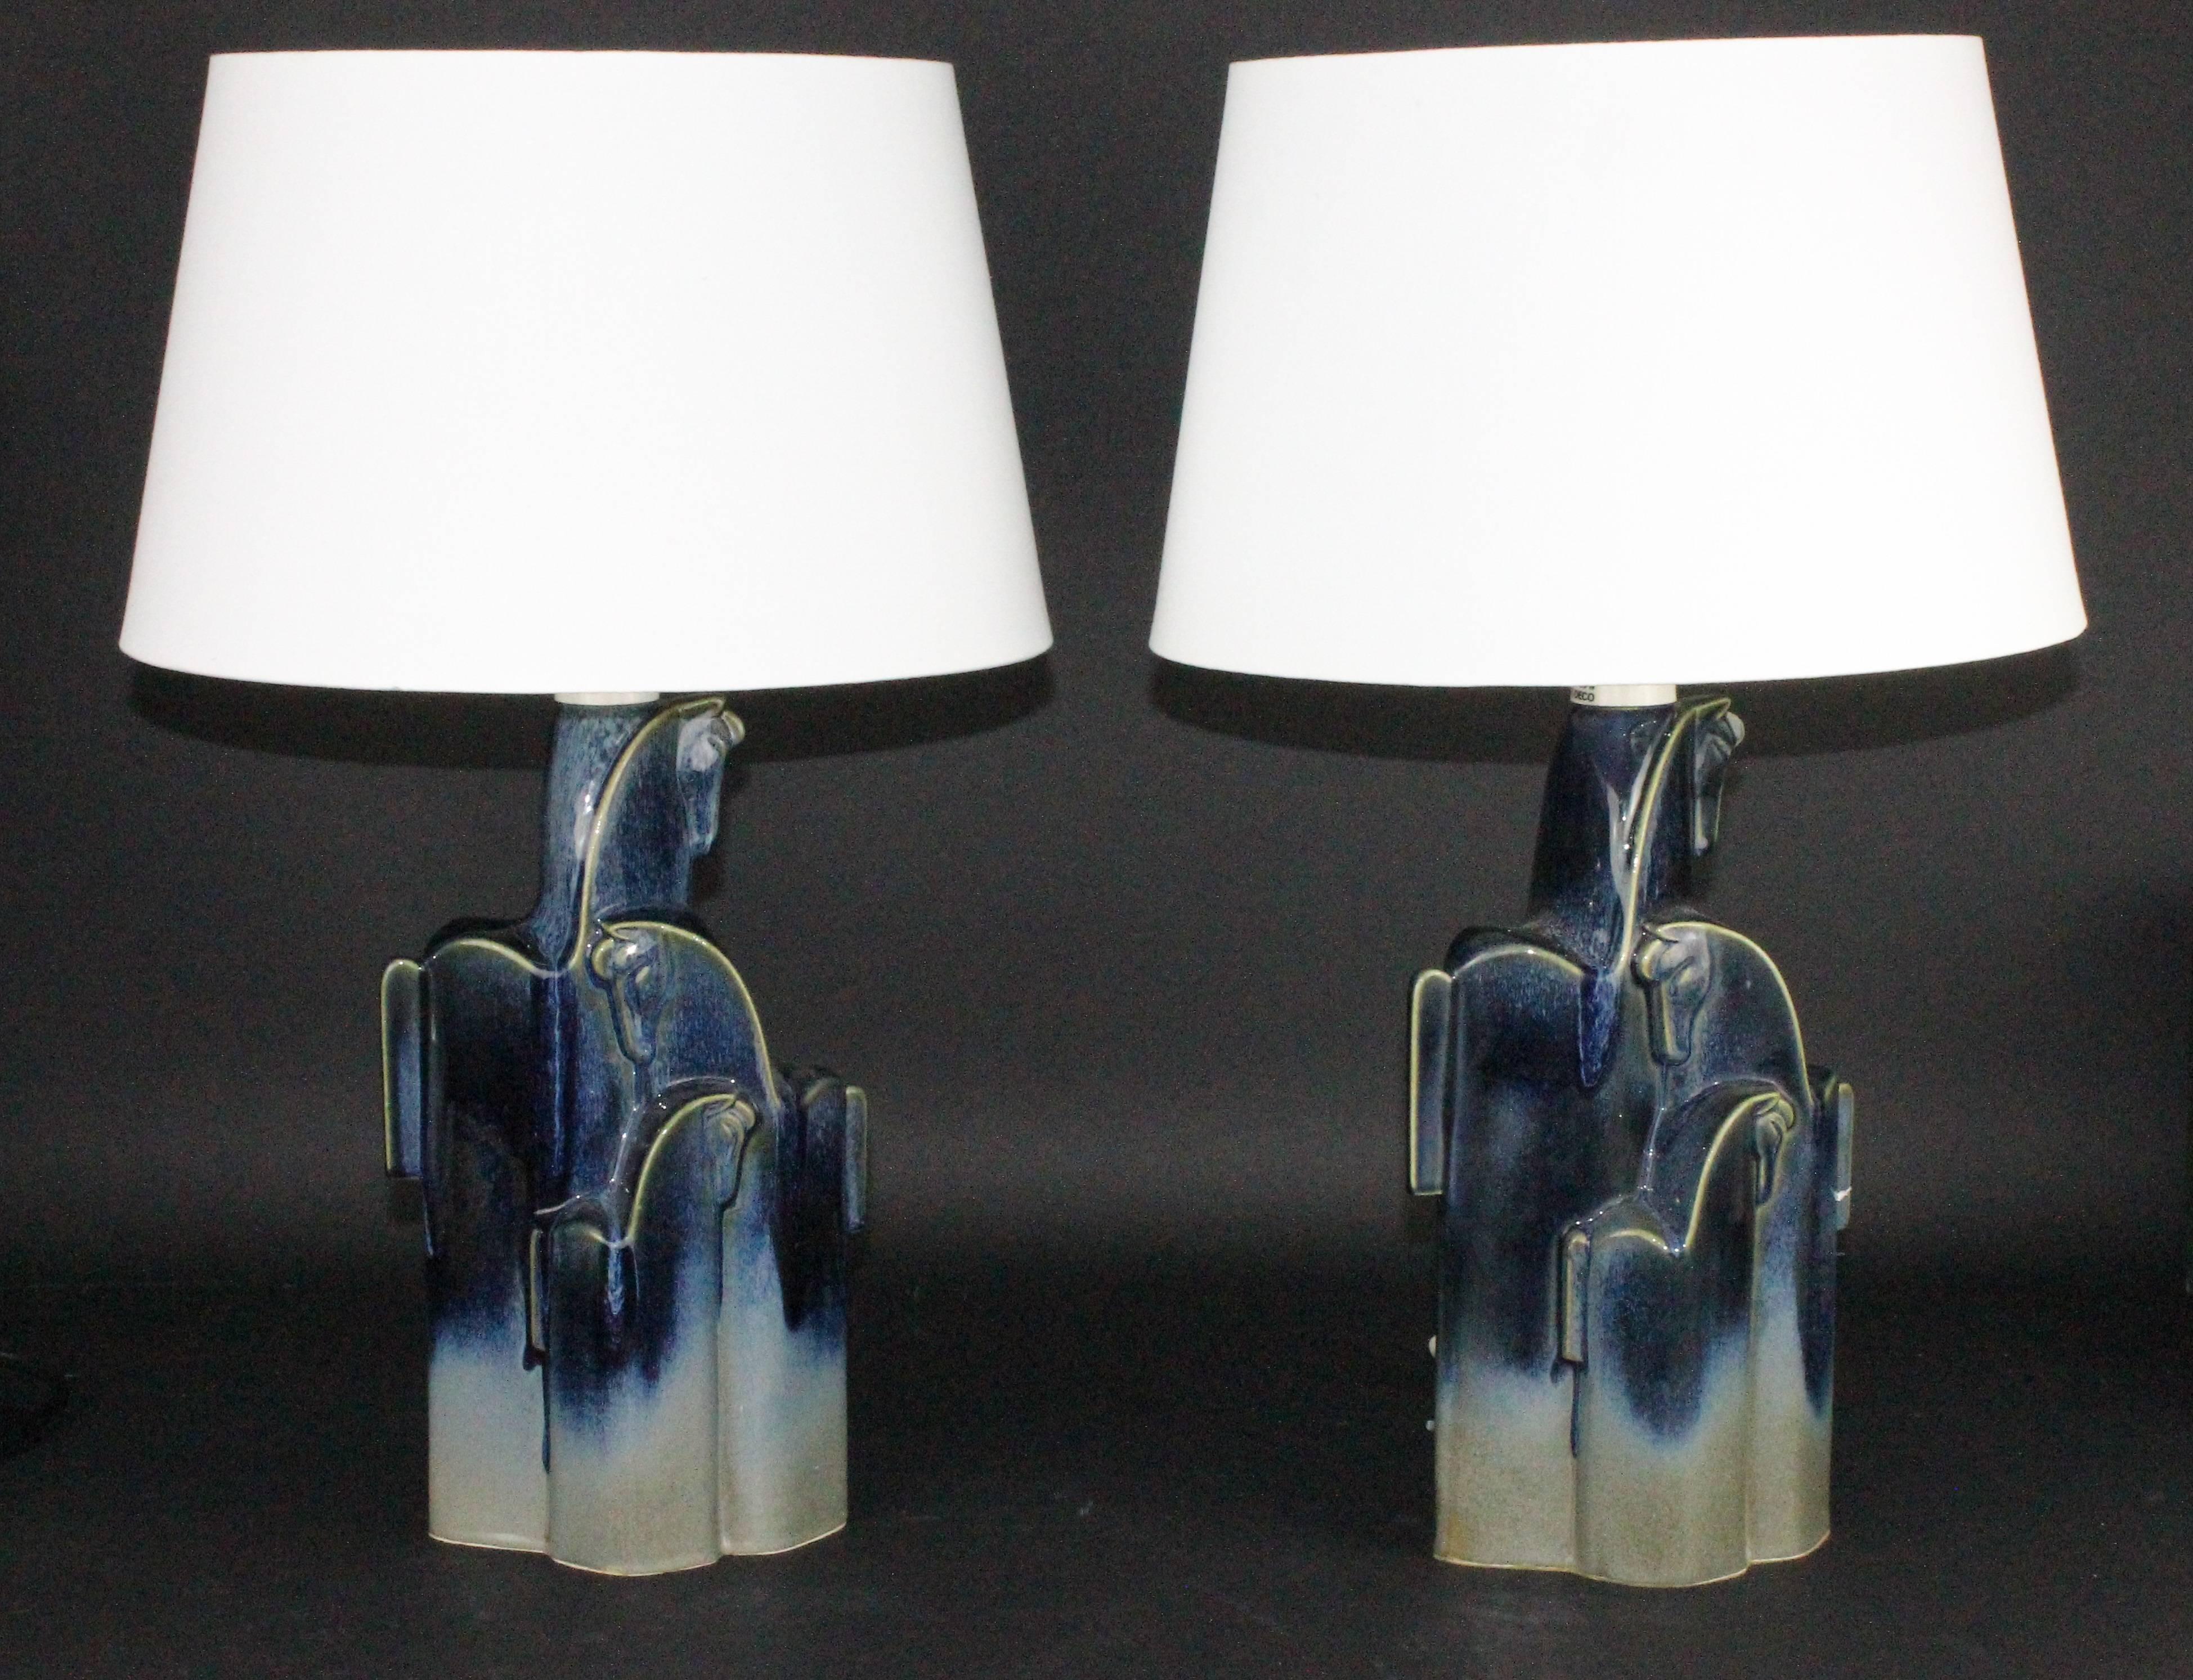 A pair of stunning table lamps by designer Christina Praestgaard. Made in Torekov in the 1970s.
Very unusual to find a pair in perfect condition. The model is called "Wild horses of Pampas".
Height of ceramic 32cm, with these shades 55cm.